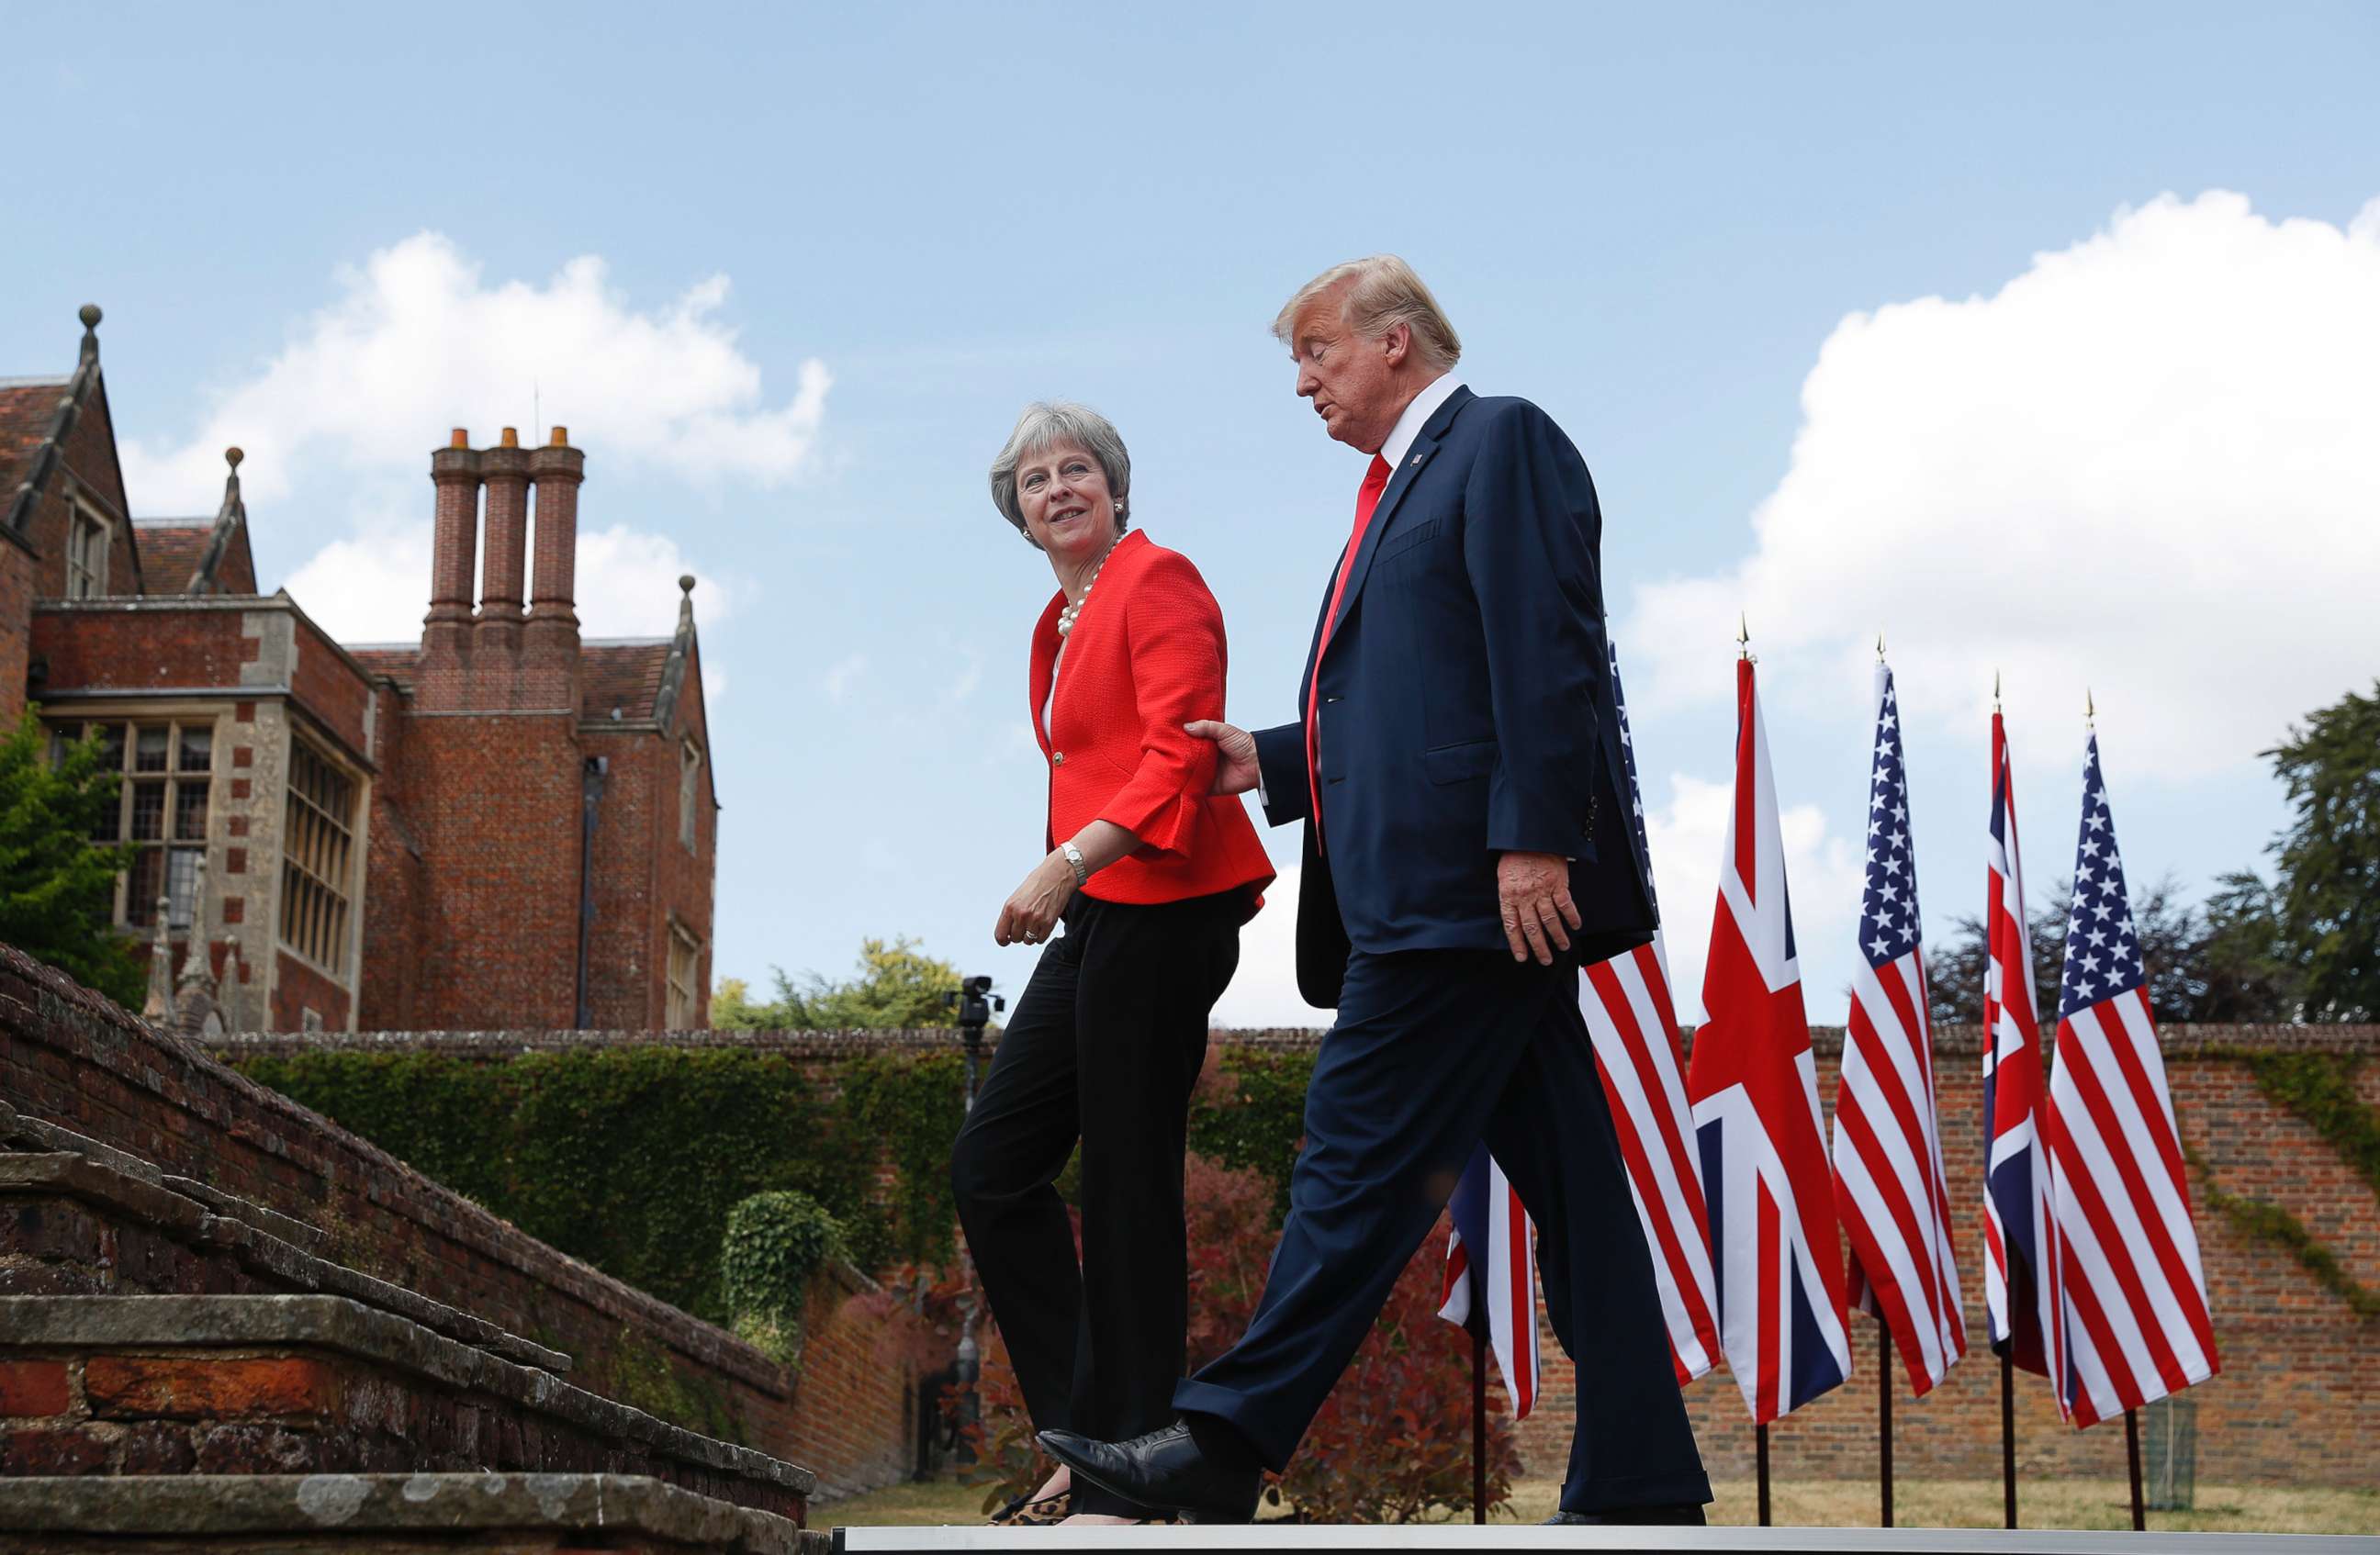 PHOTO: President Donald Trump walks with British Prime Minister Theresa May at the conclusion of their joint news conference at Chequers, in Buckinghamshire, England, July 13, 2018.